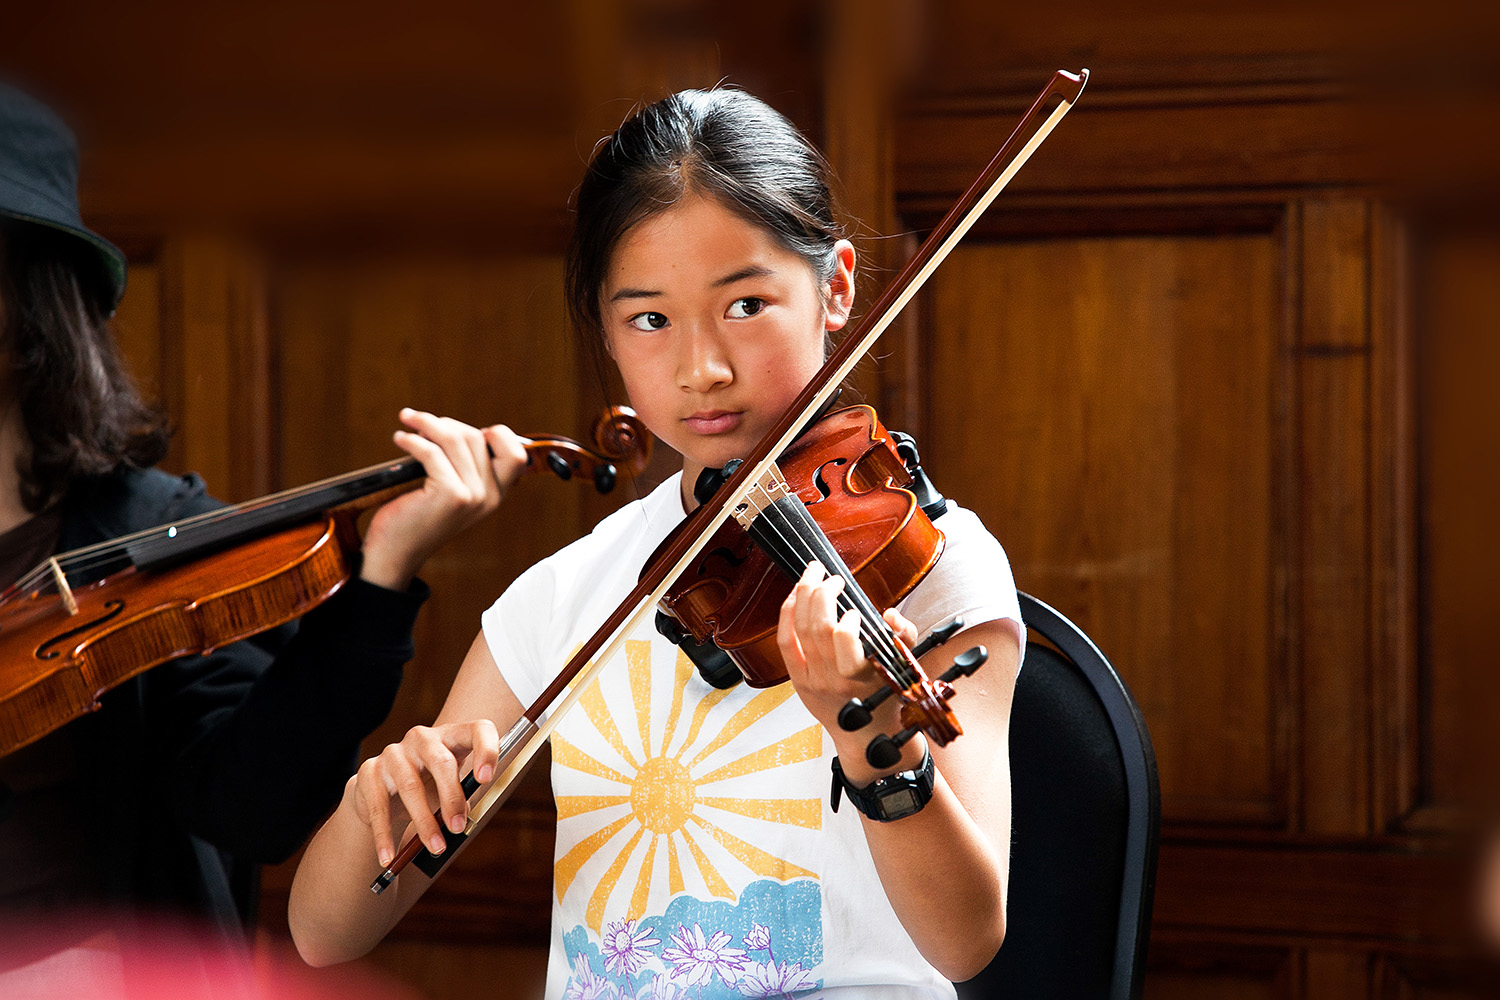 A young girl plays the violin